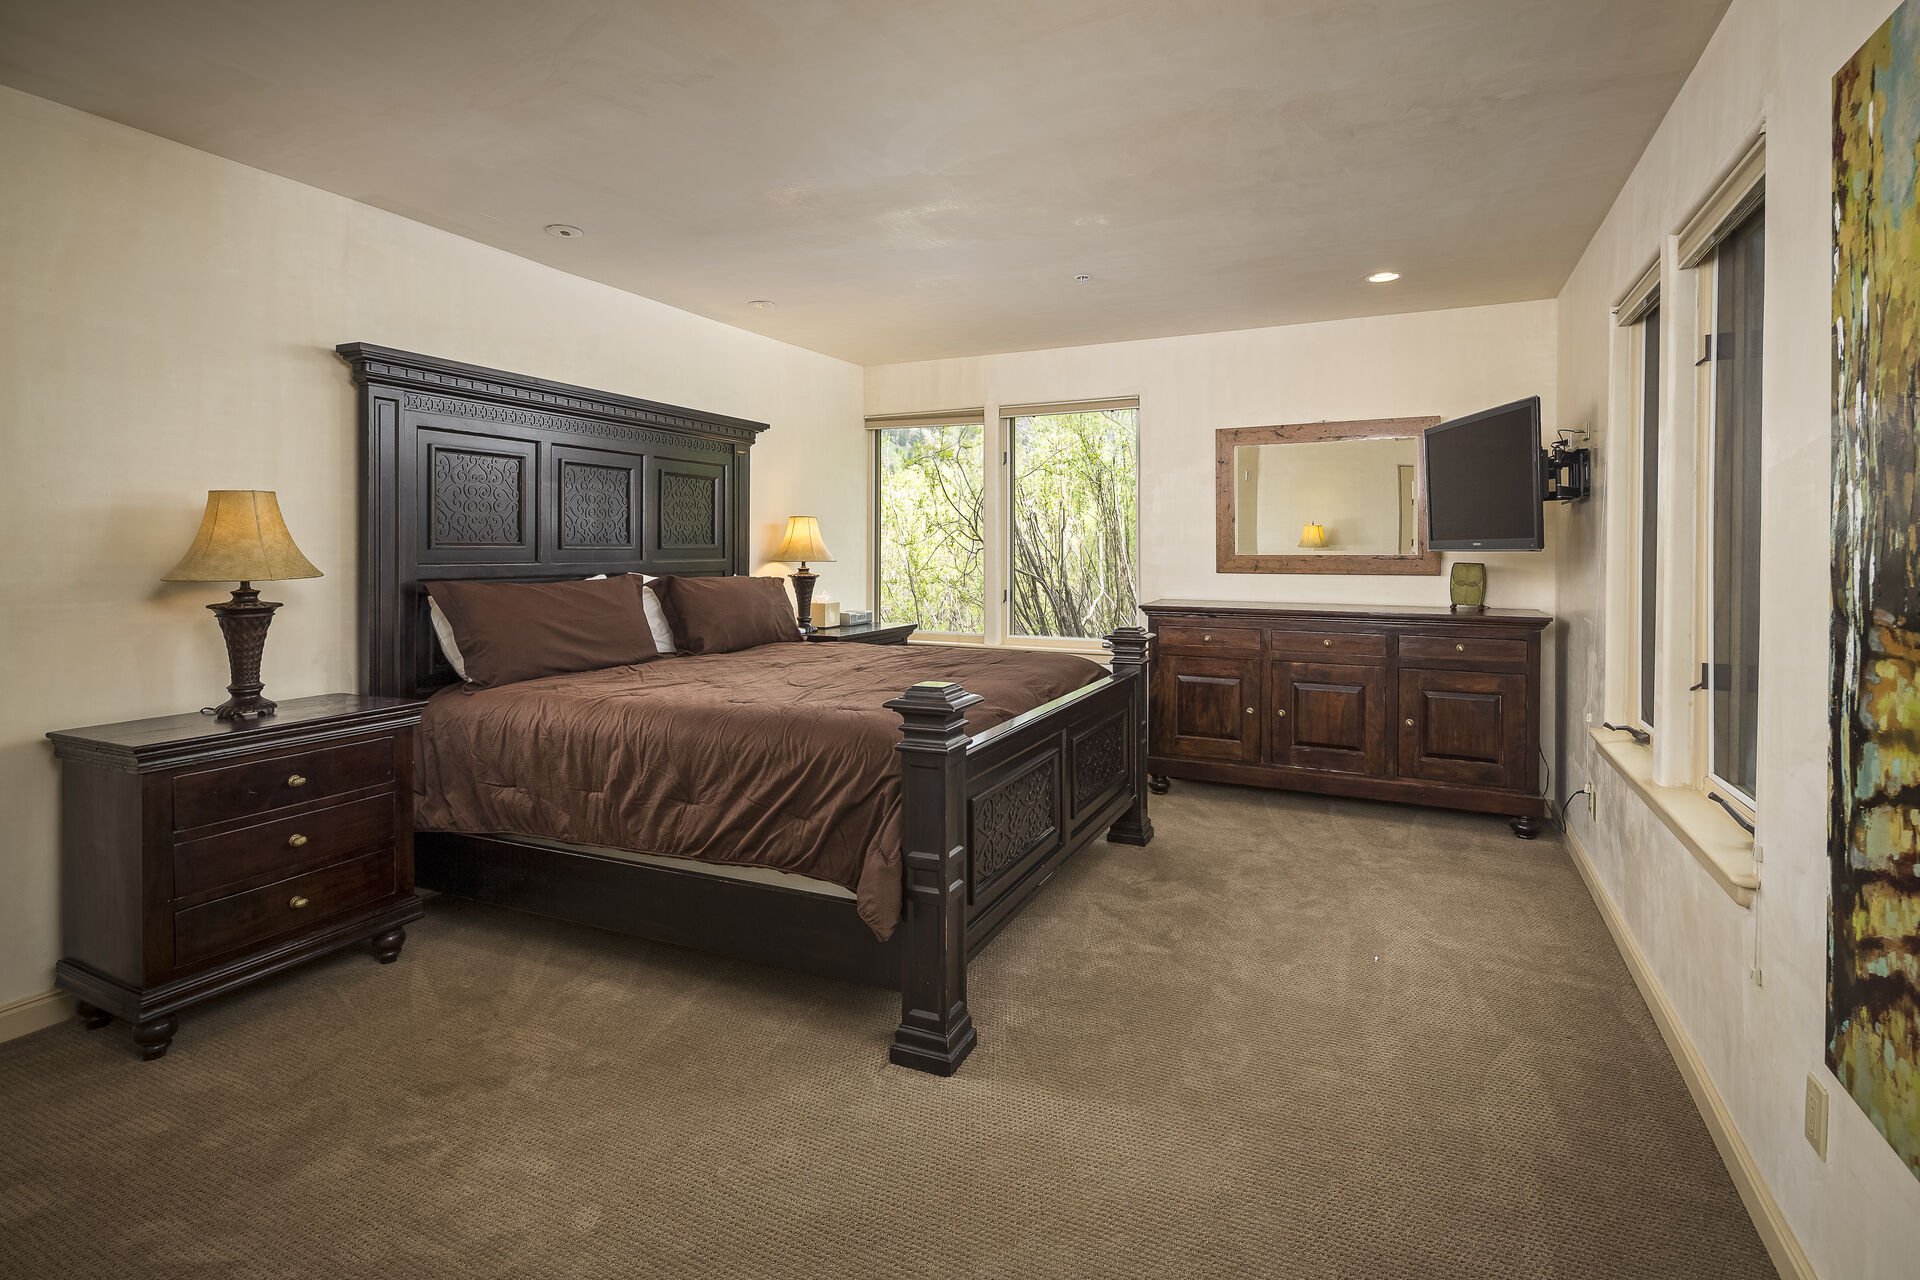 Twin nightstands on either side of a large bed in a bedroom, complete with a wall-mounted TV and vanity dresser.